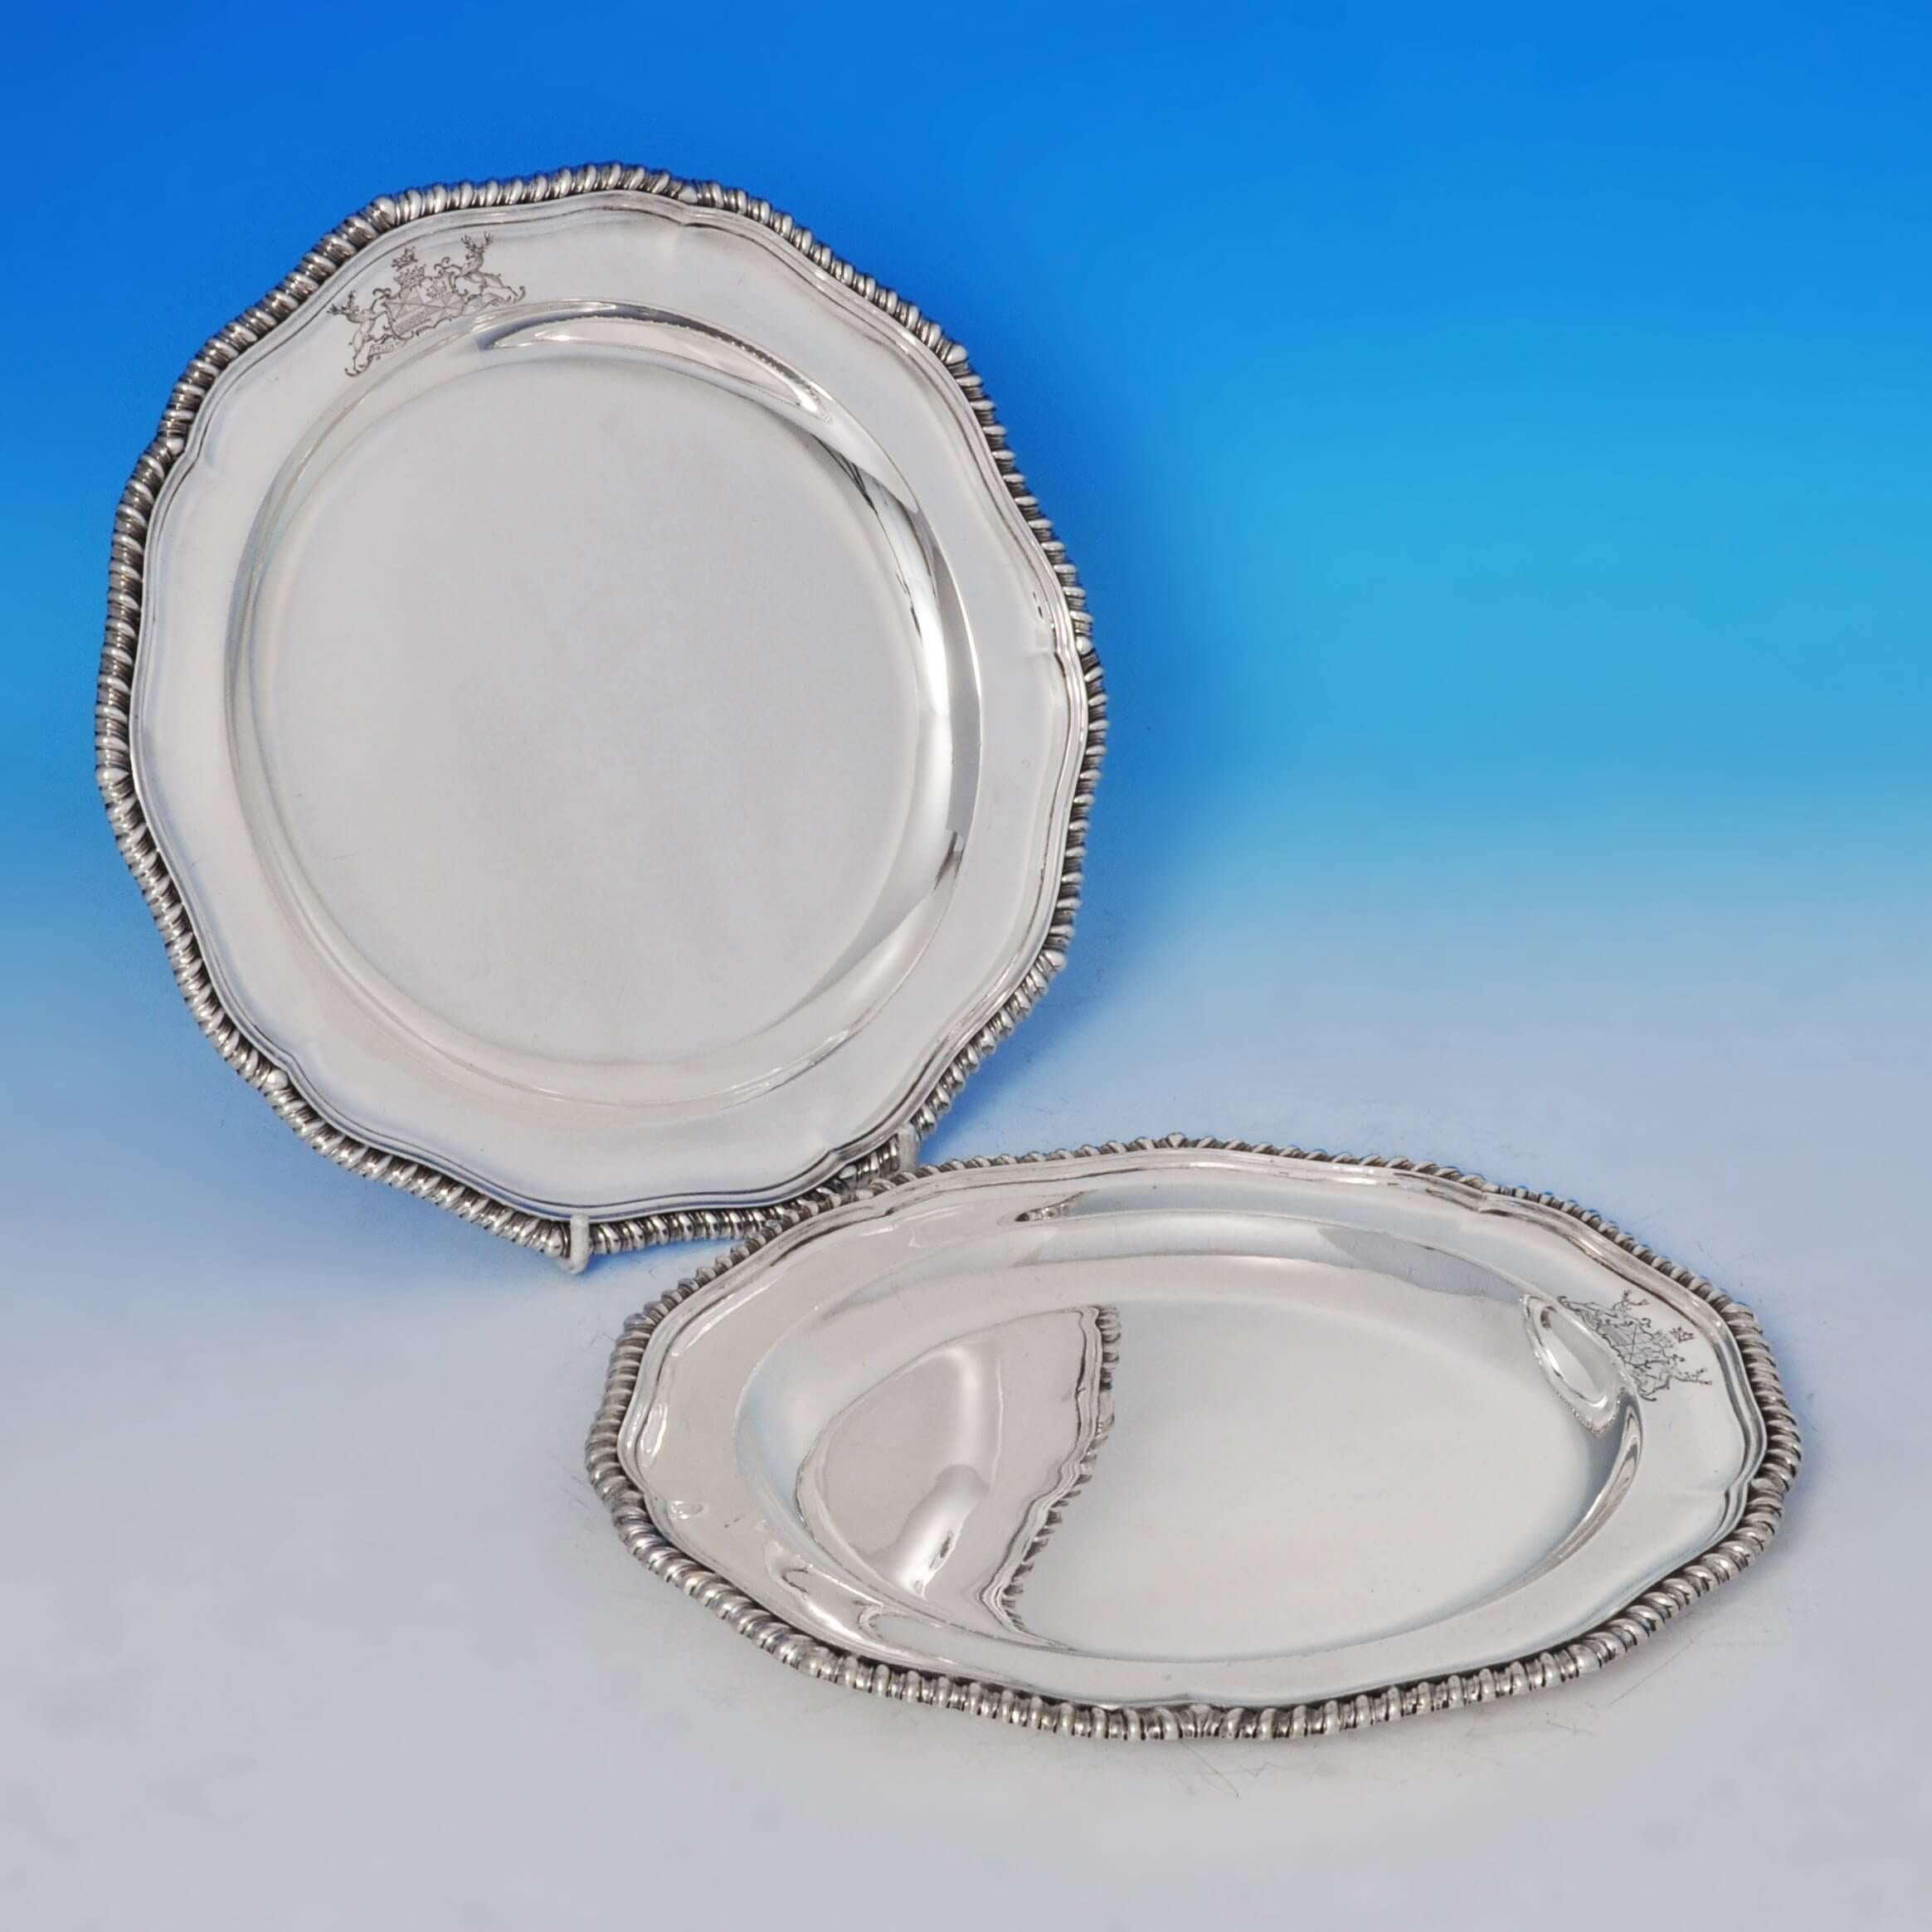 Hallmarked in London, in 1800 by Timothy Renou, this handsome, George III, Antique, sterling silver set of 12 plates, feature shaped gadroon borders and engraved coat of arms. Each plate measures 10 inches (25.5cm) in diameter, and the set together